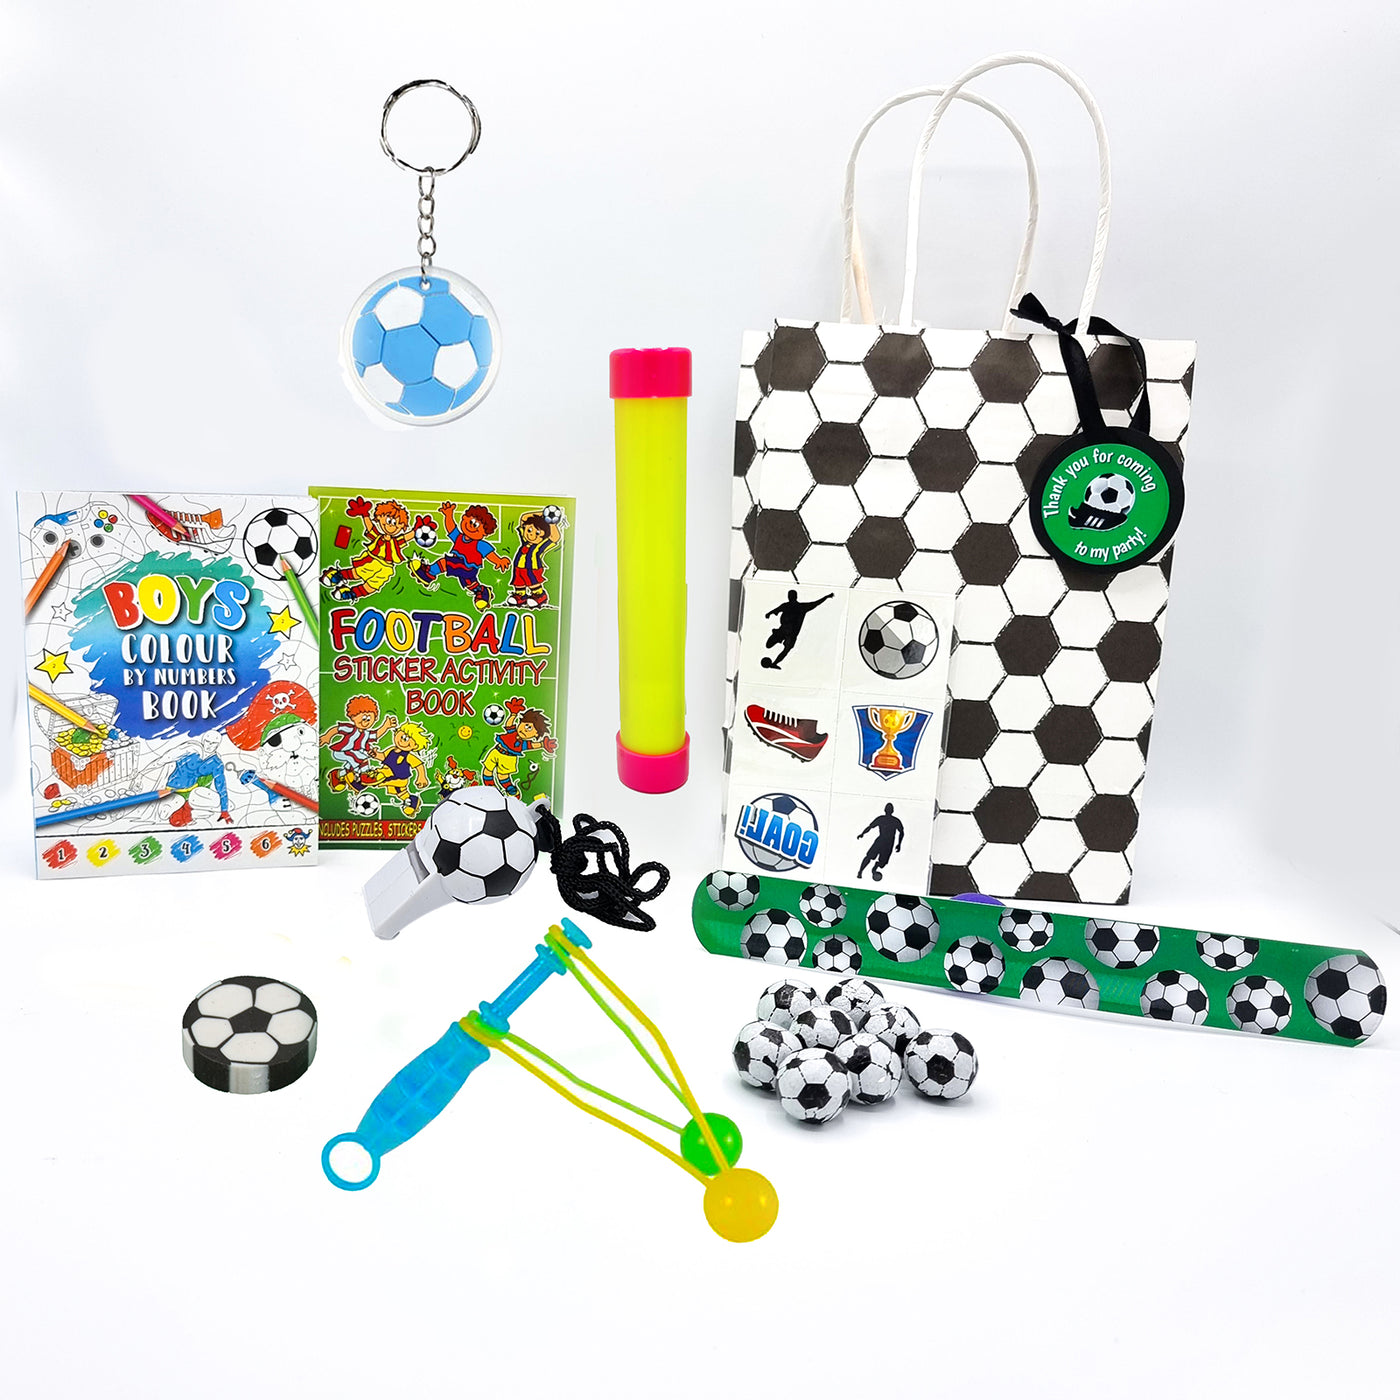 Pre Filled Football Birthday Party Bag Gift Set For Children, Football Birthday Party Goody Bags With Football Toys And Candy For Boys And Girls.